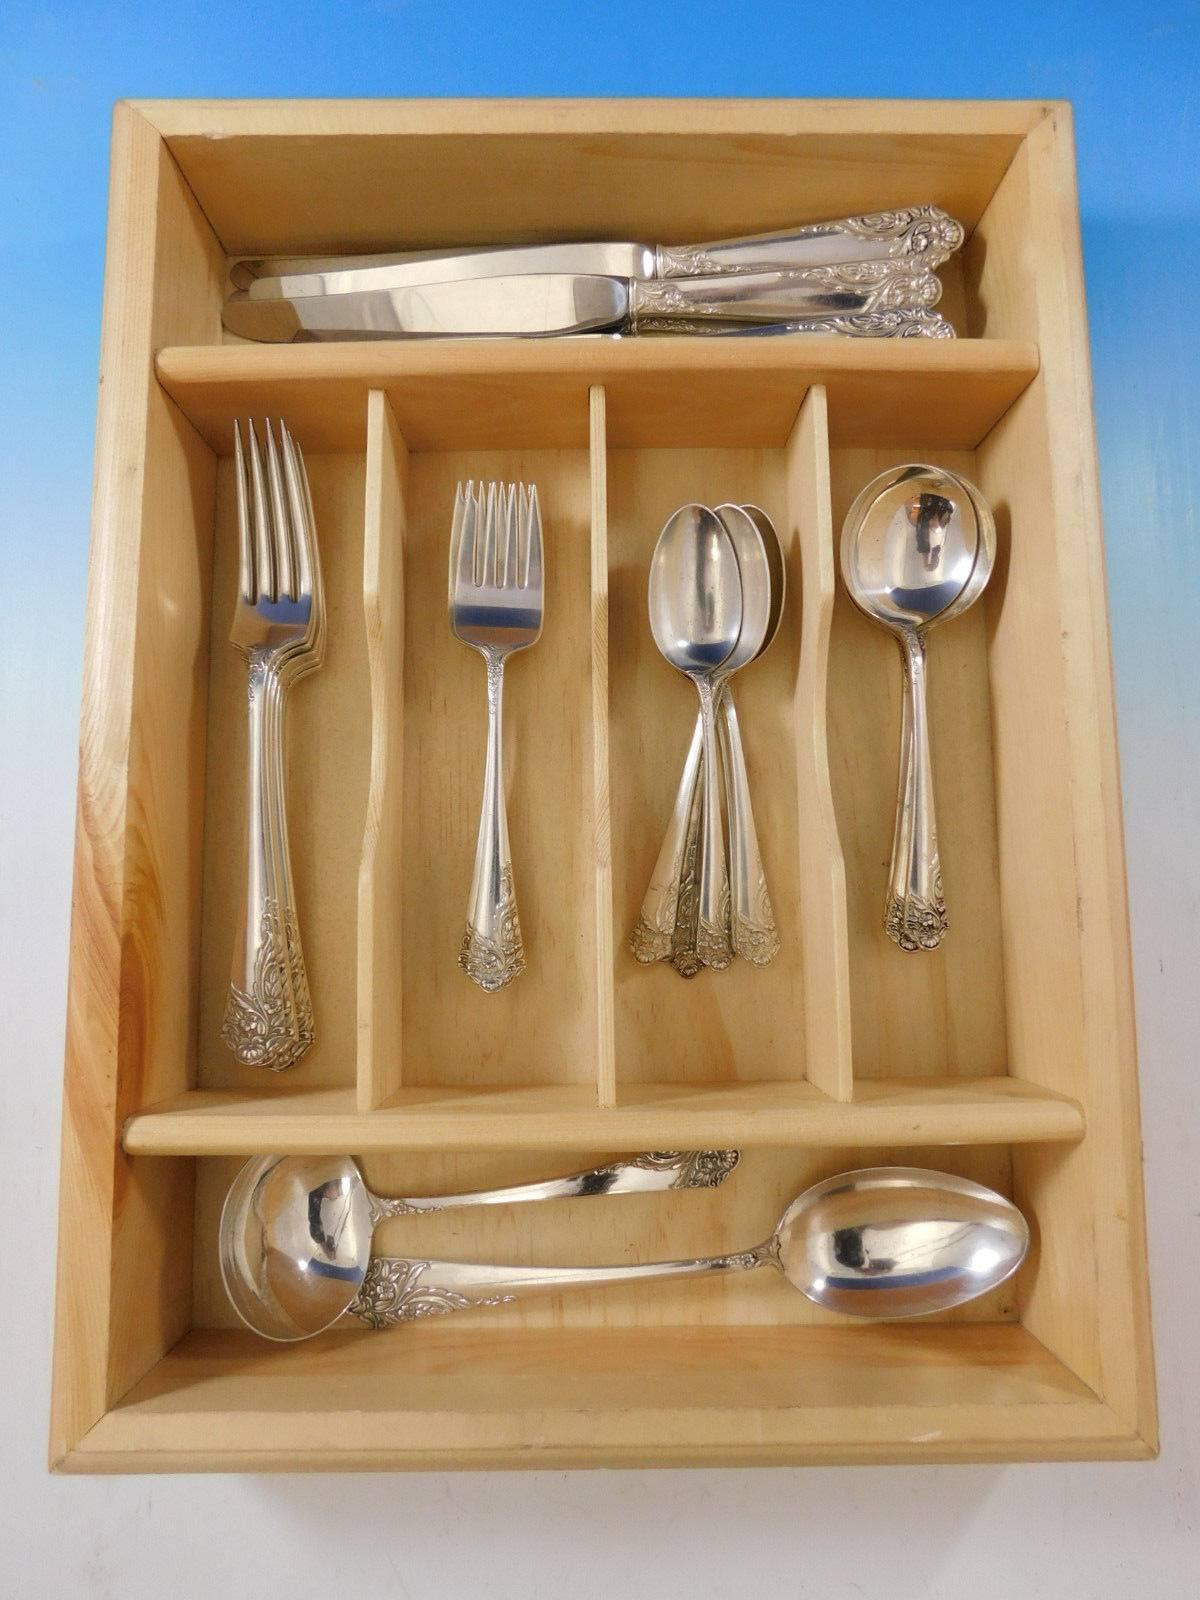 Dinner size Ecstasy by Amston circa 1951 sterling silver flatware set with a sweeping floral design, 32 pieces. Great starter set! This set includes:

Six dinner size knives, 9 3/4